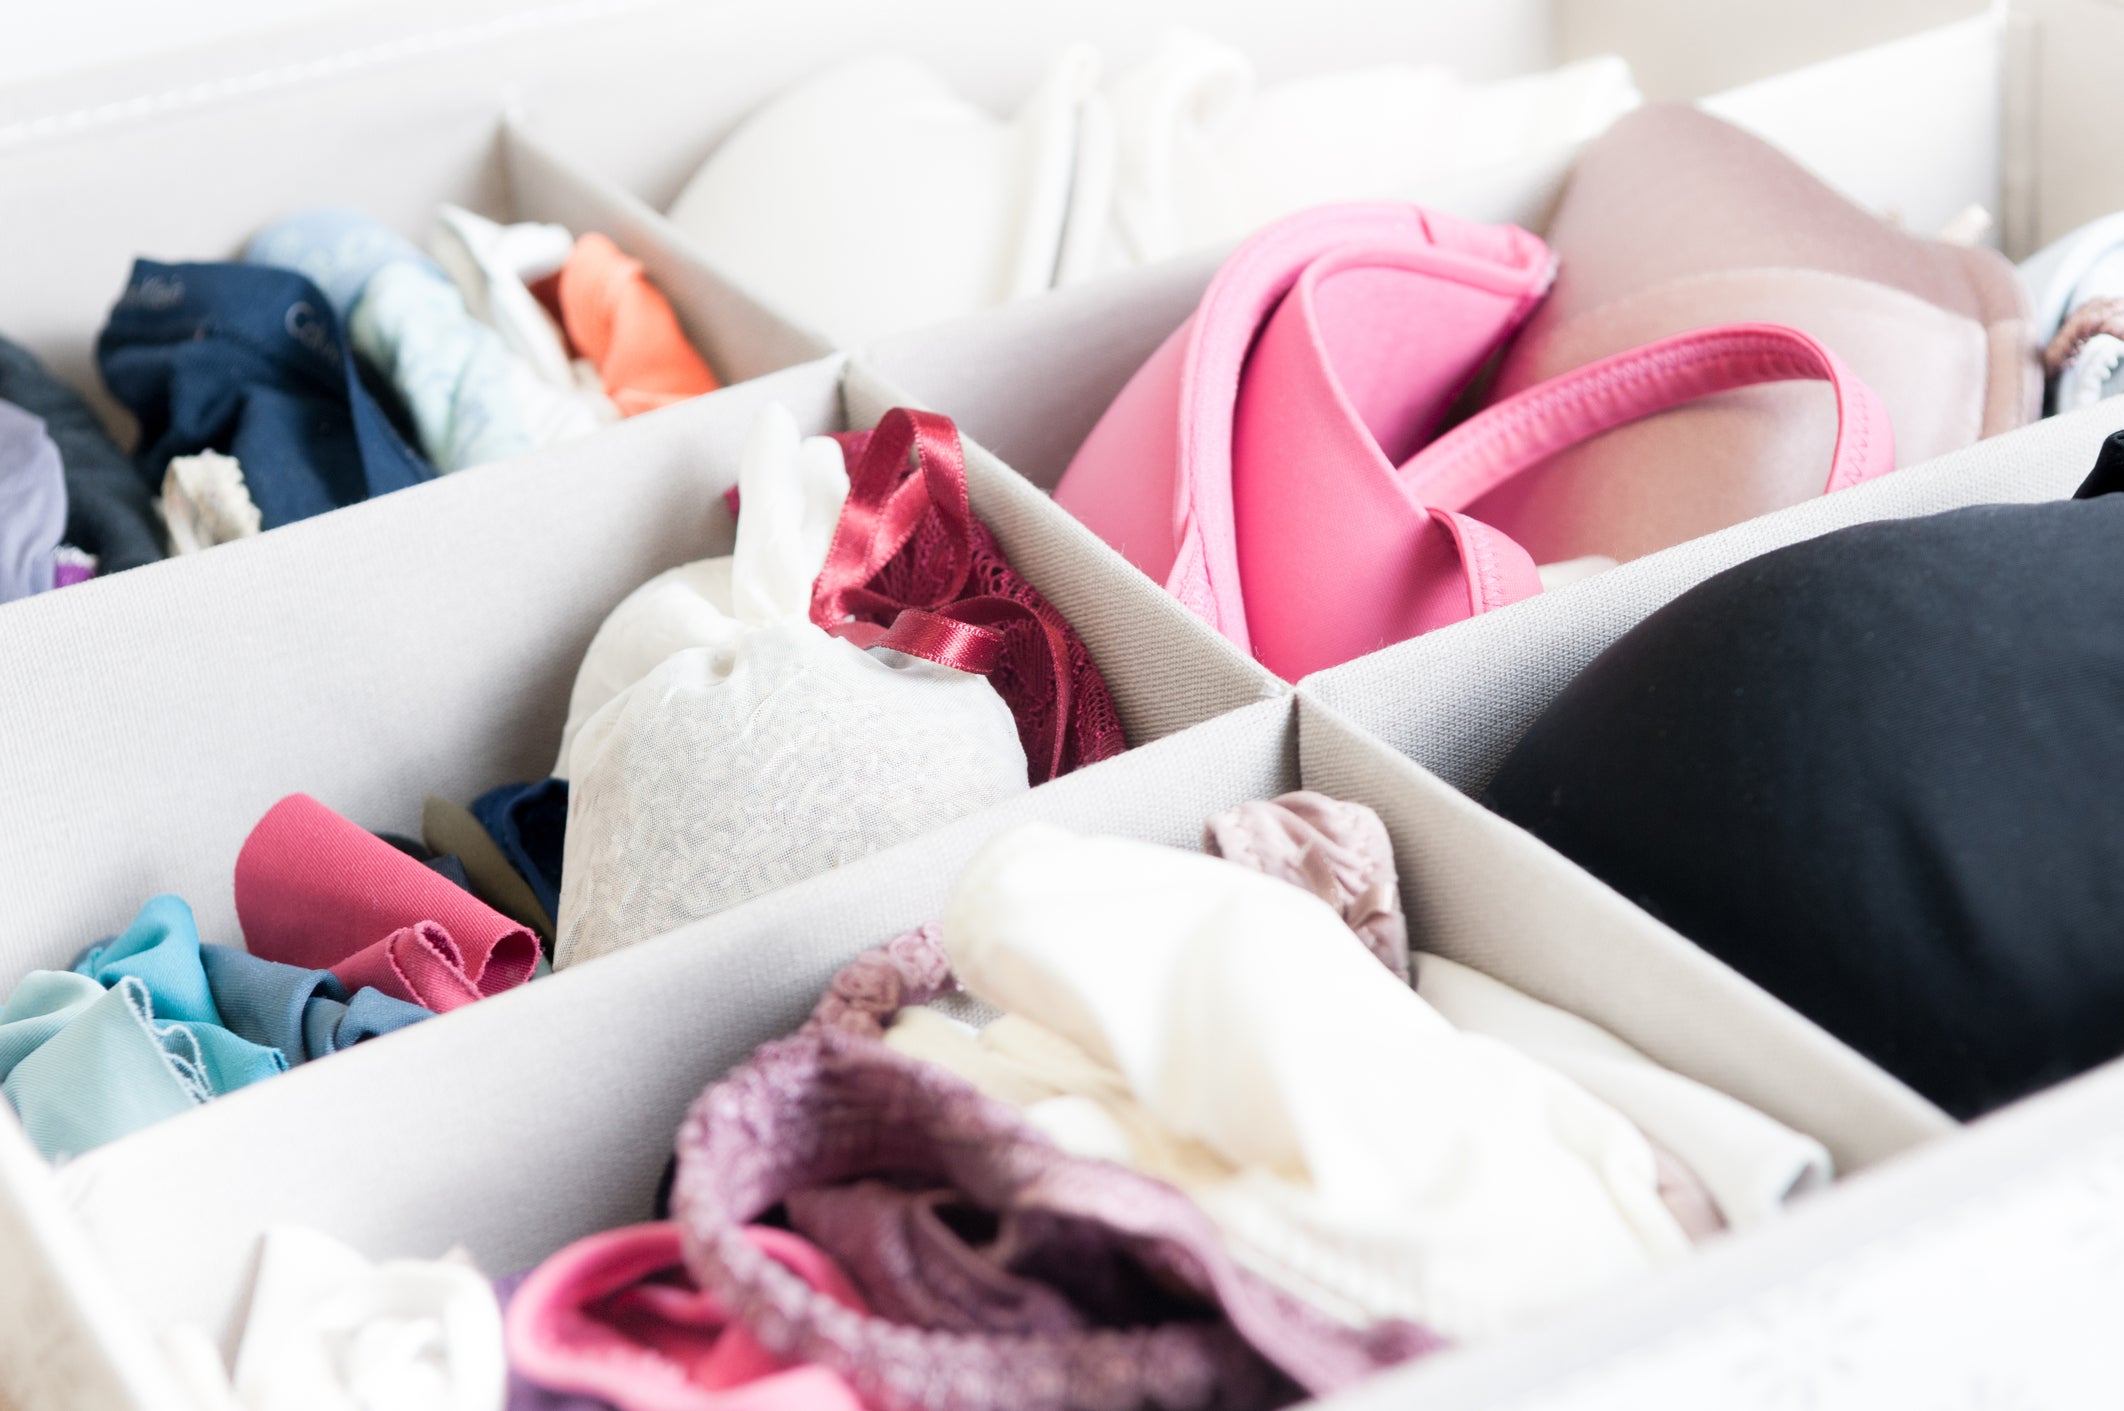 5 ways to avoid a visible panty line, according to a stylist